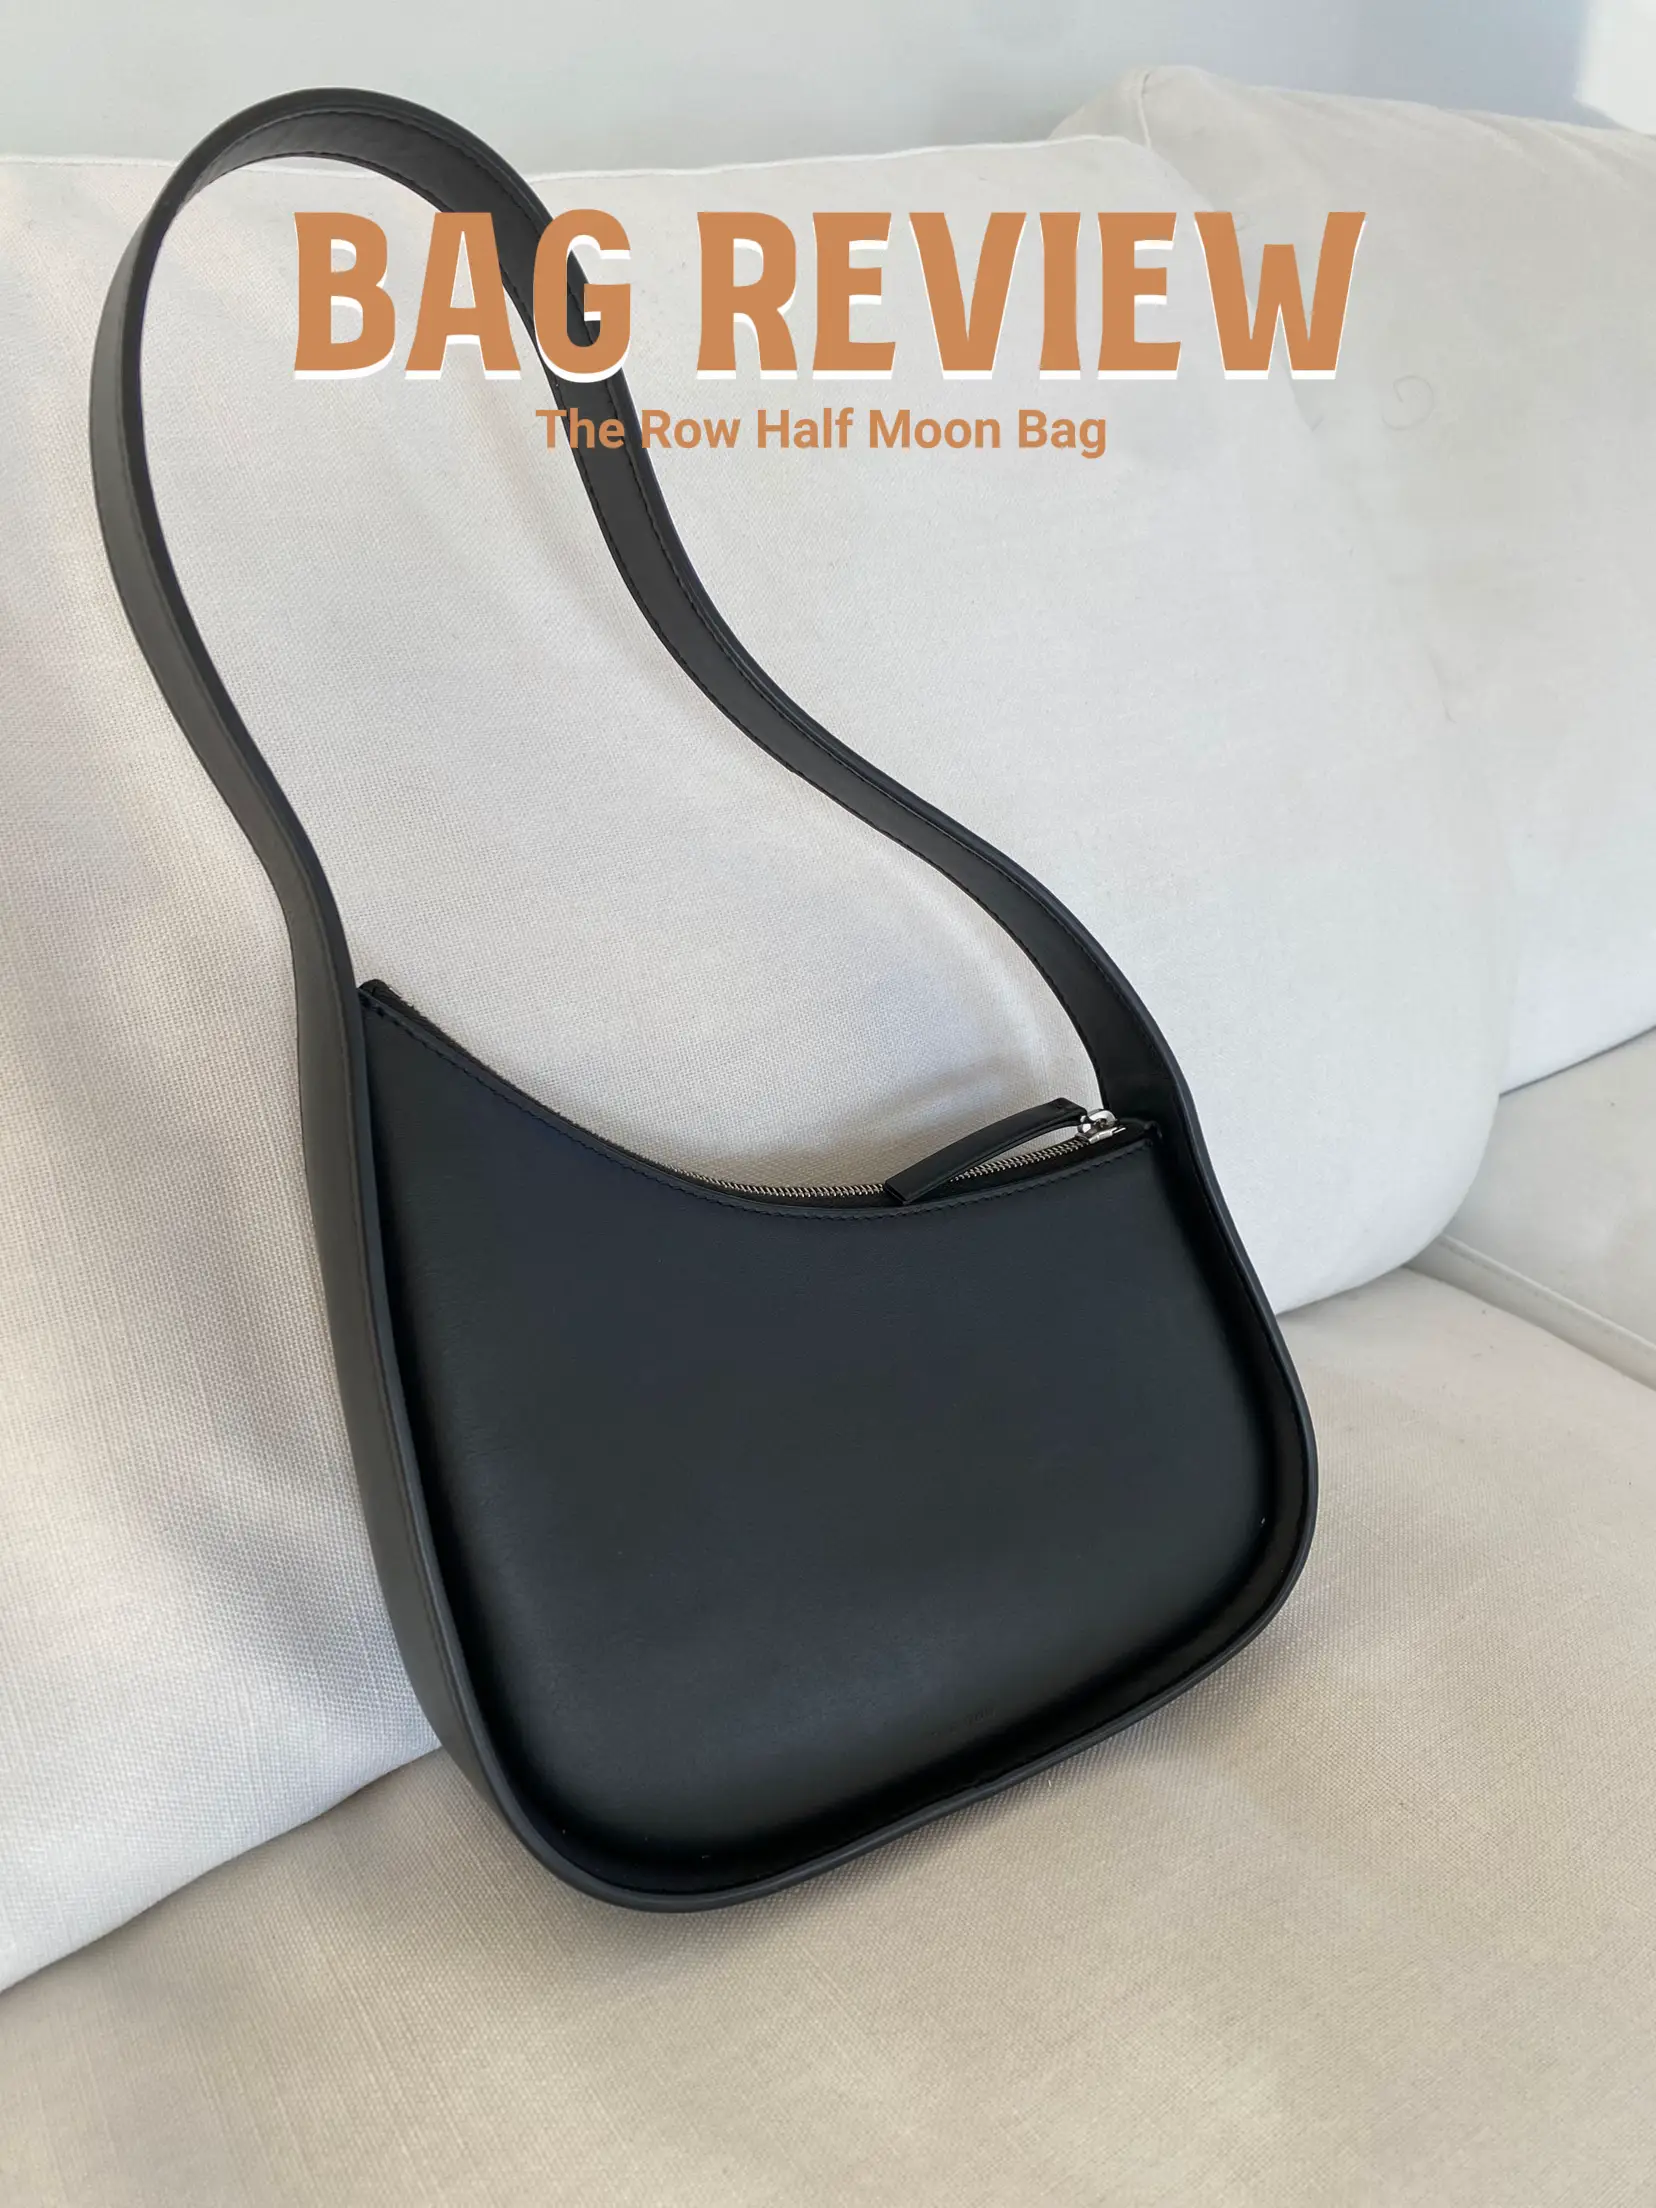 The Half Moon Bag by The Row, Pros & Cons, Why I Am Sending It Back